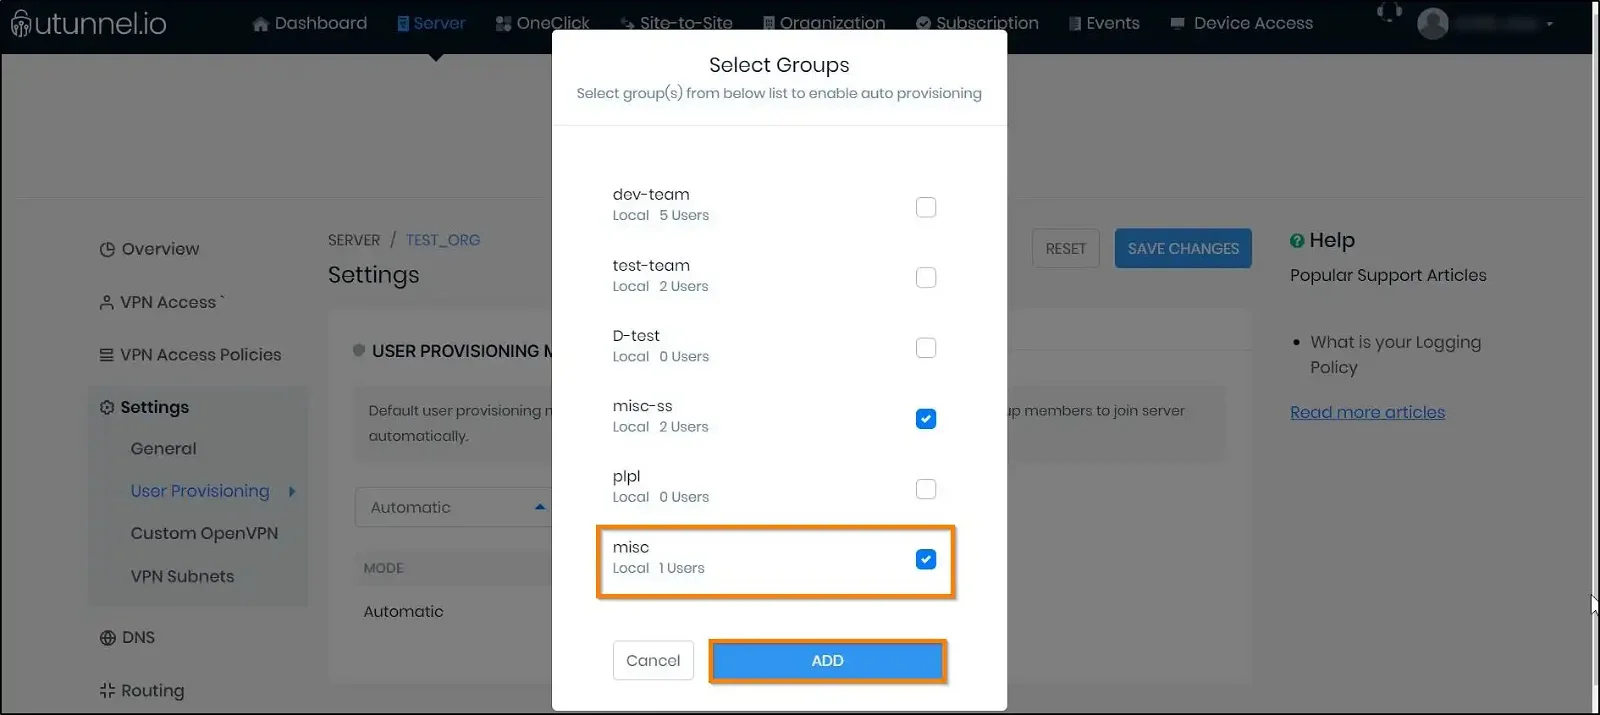 How to enable user provisioning on a server select groups